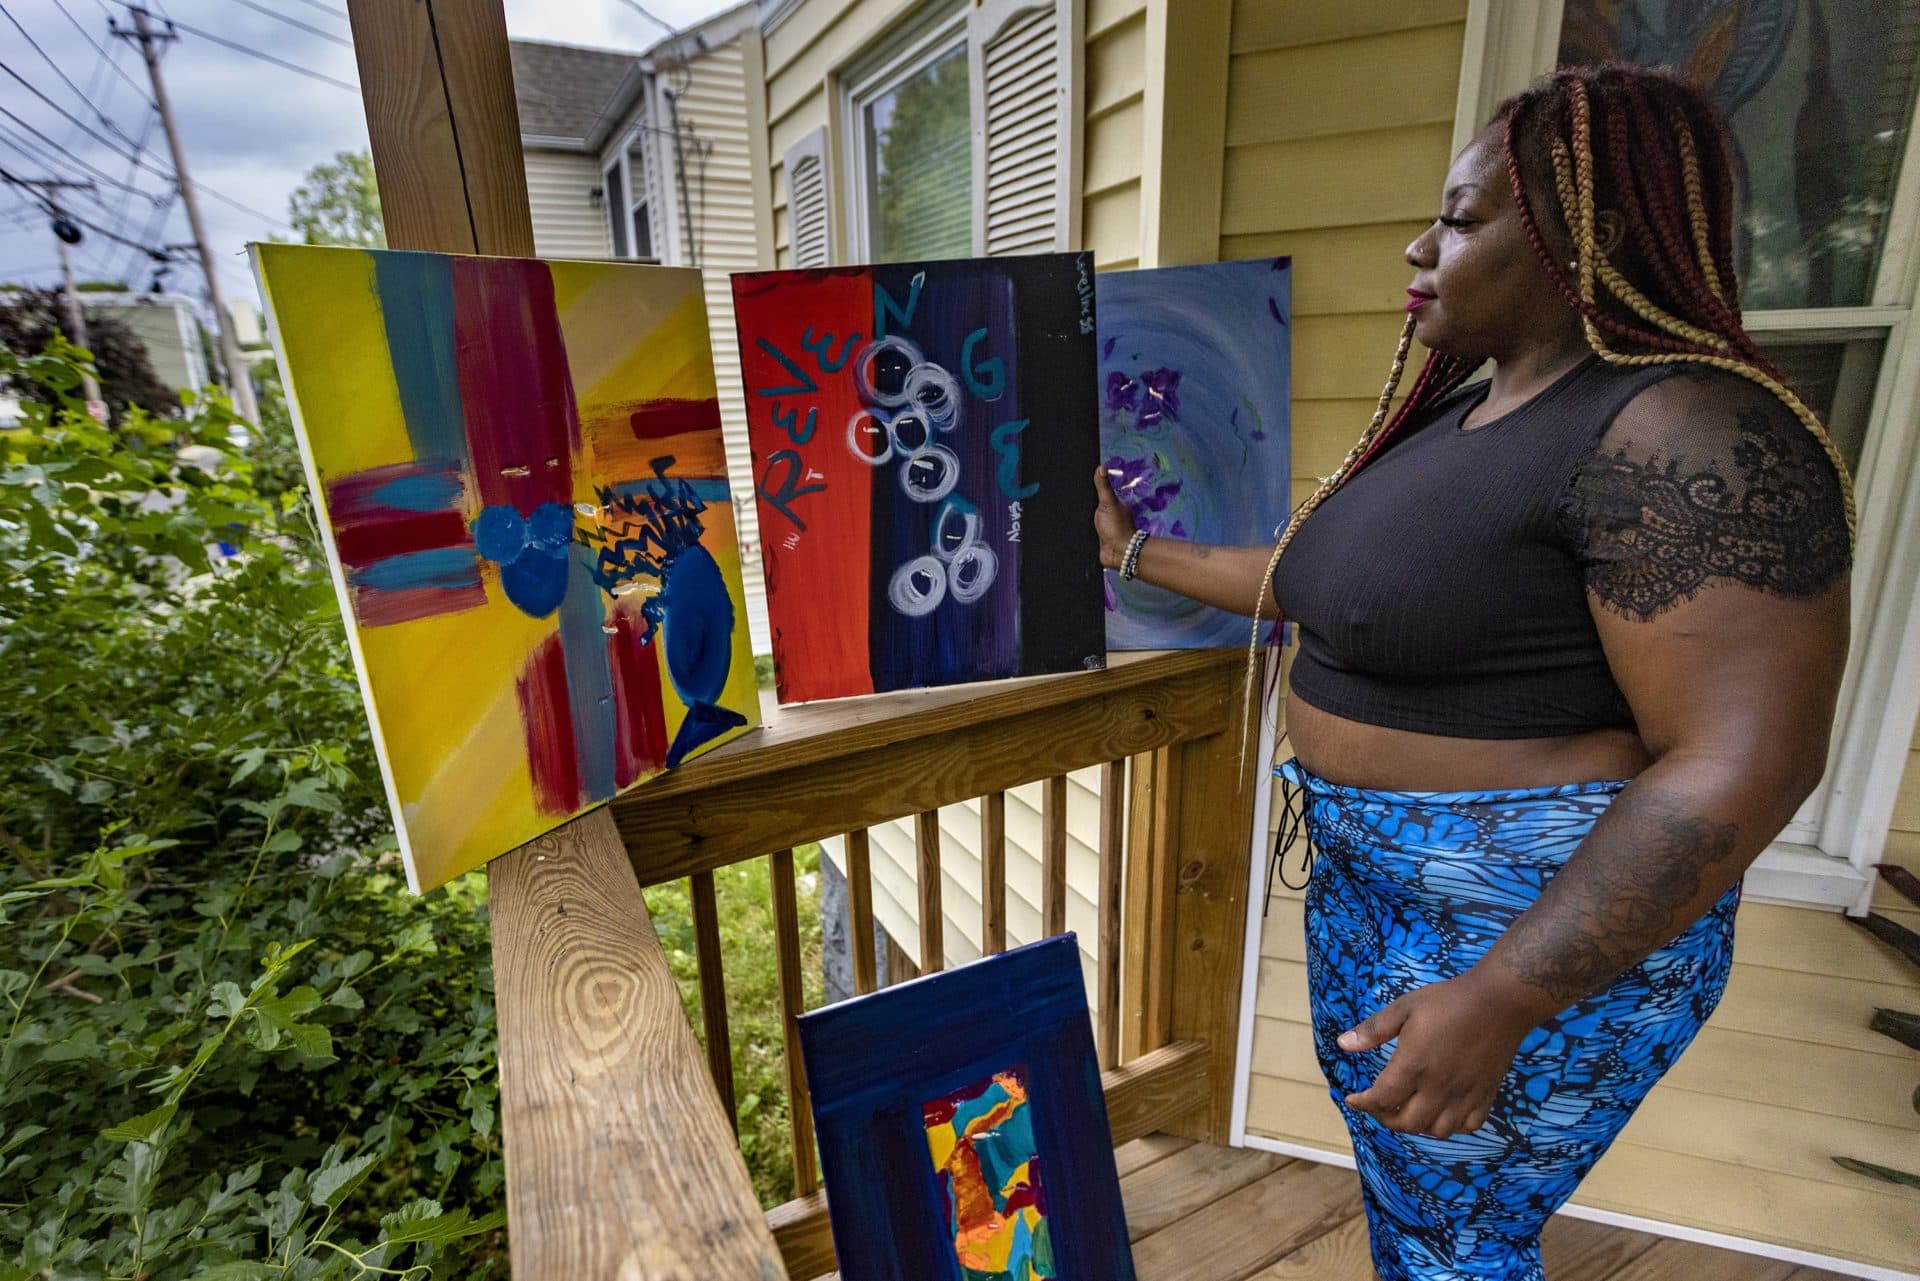 Geneva Davis shows art she made on canvases slashed by her ex-boyfriend. Davis was beaten and held hostage for hours by her ex at her apartment. (Jesse Costa/WBUR)